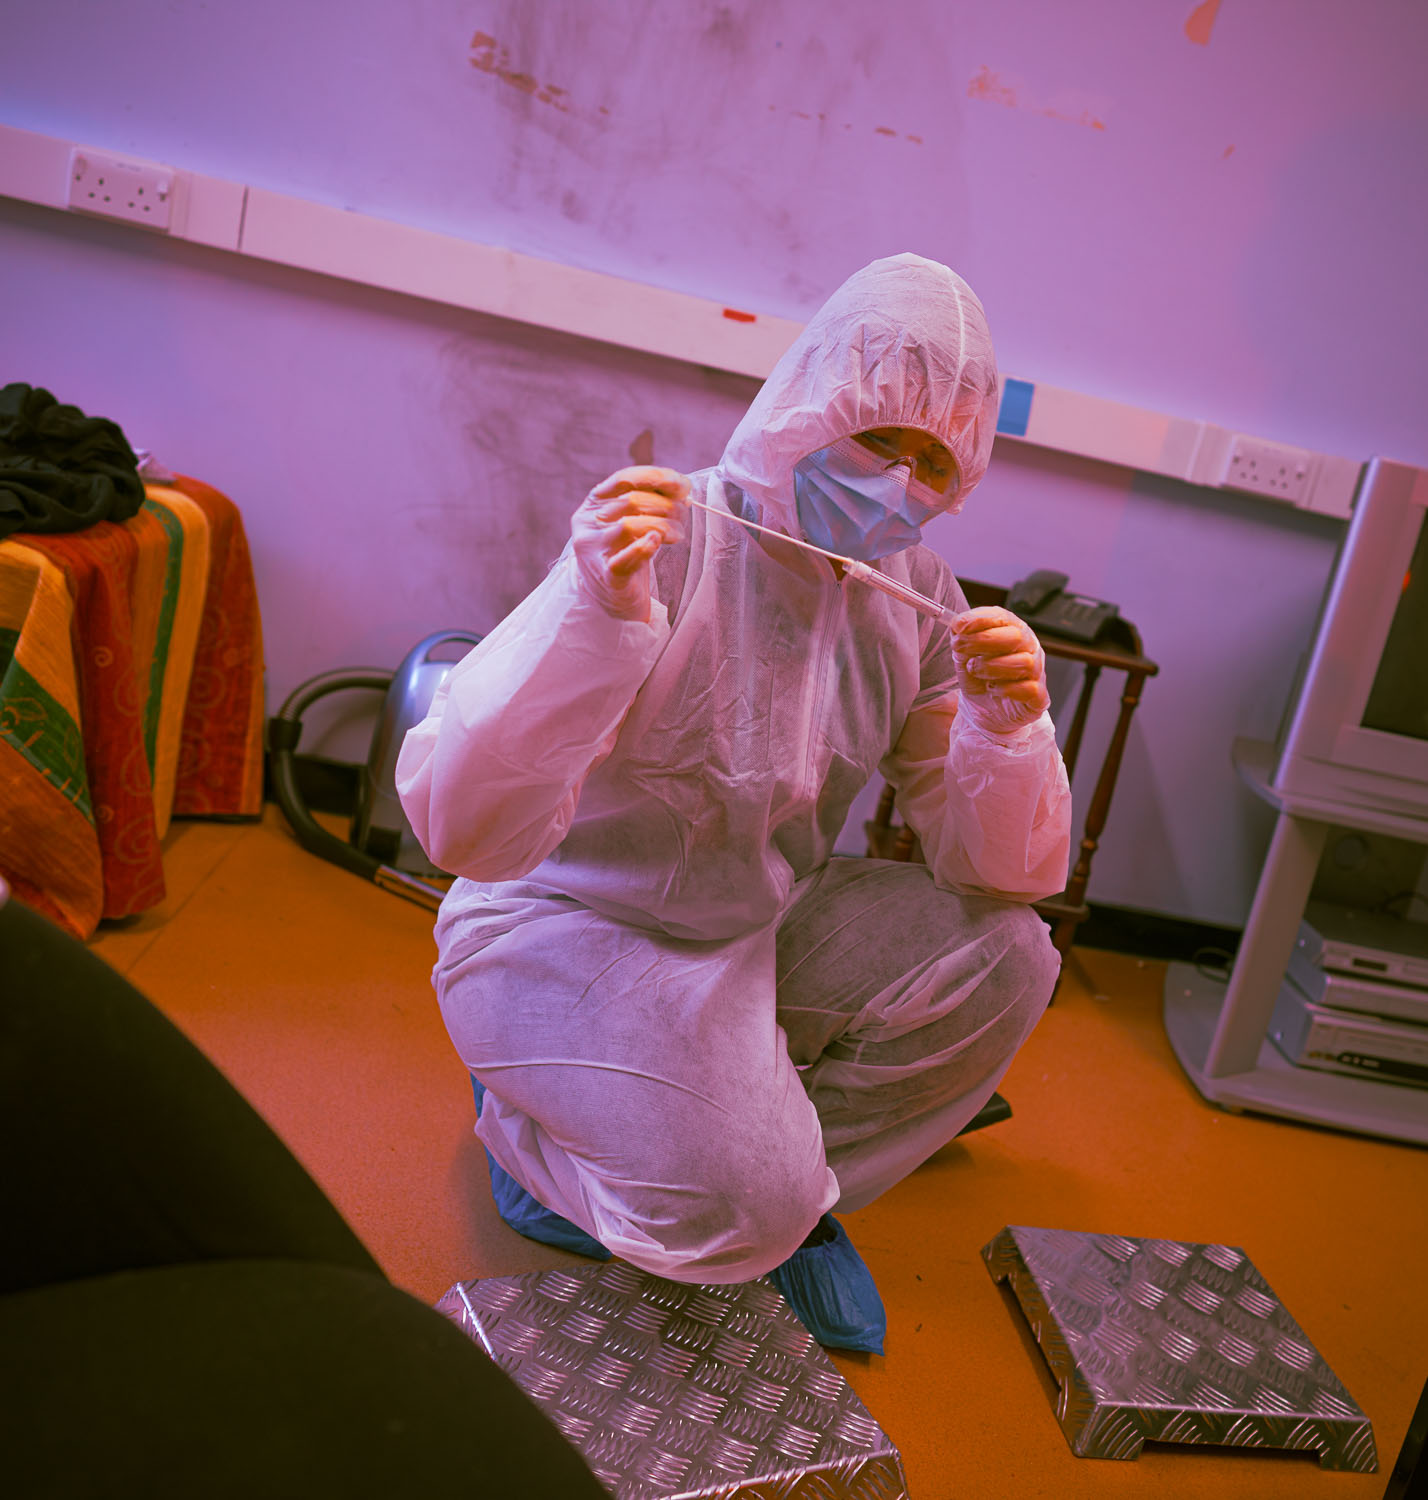 Southport College runs a Forensic Science and Criminal Investigation course for school leavers aged 16-18